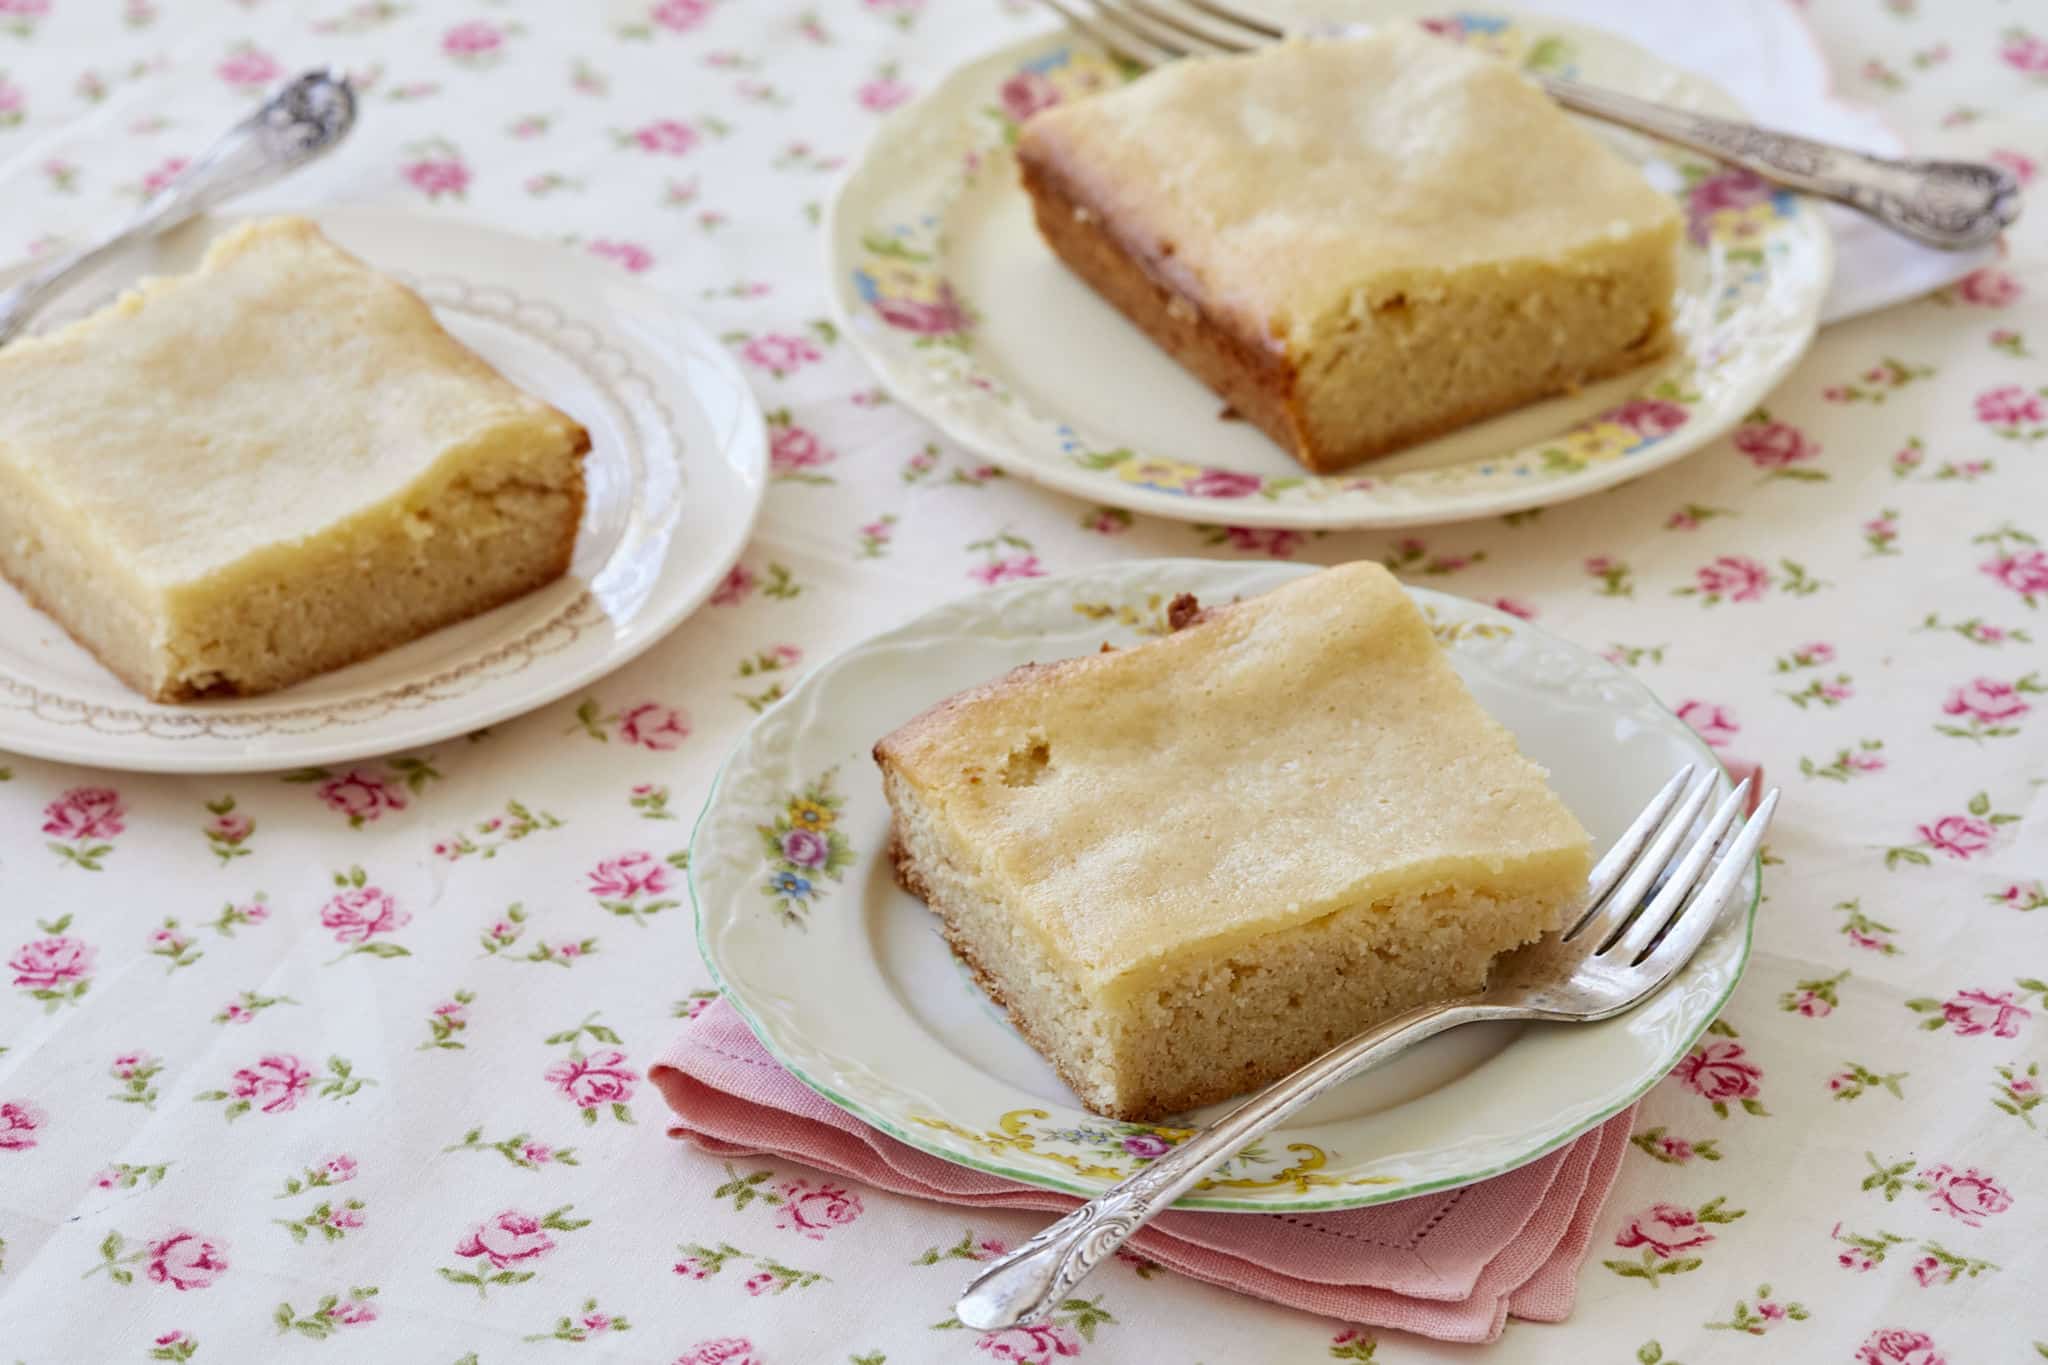 Three pieces of maple gooey butter cake on individual plates with forks, on a floral tablecloth.